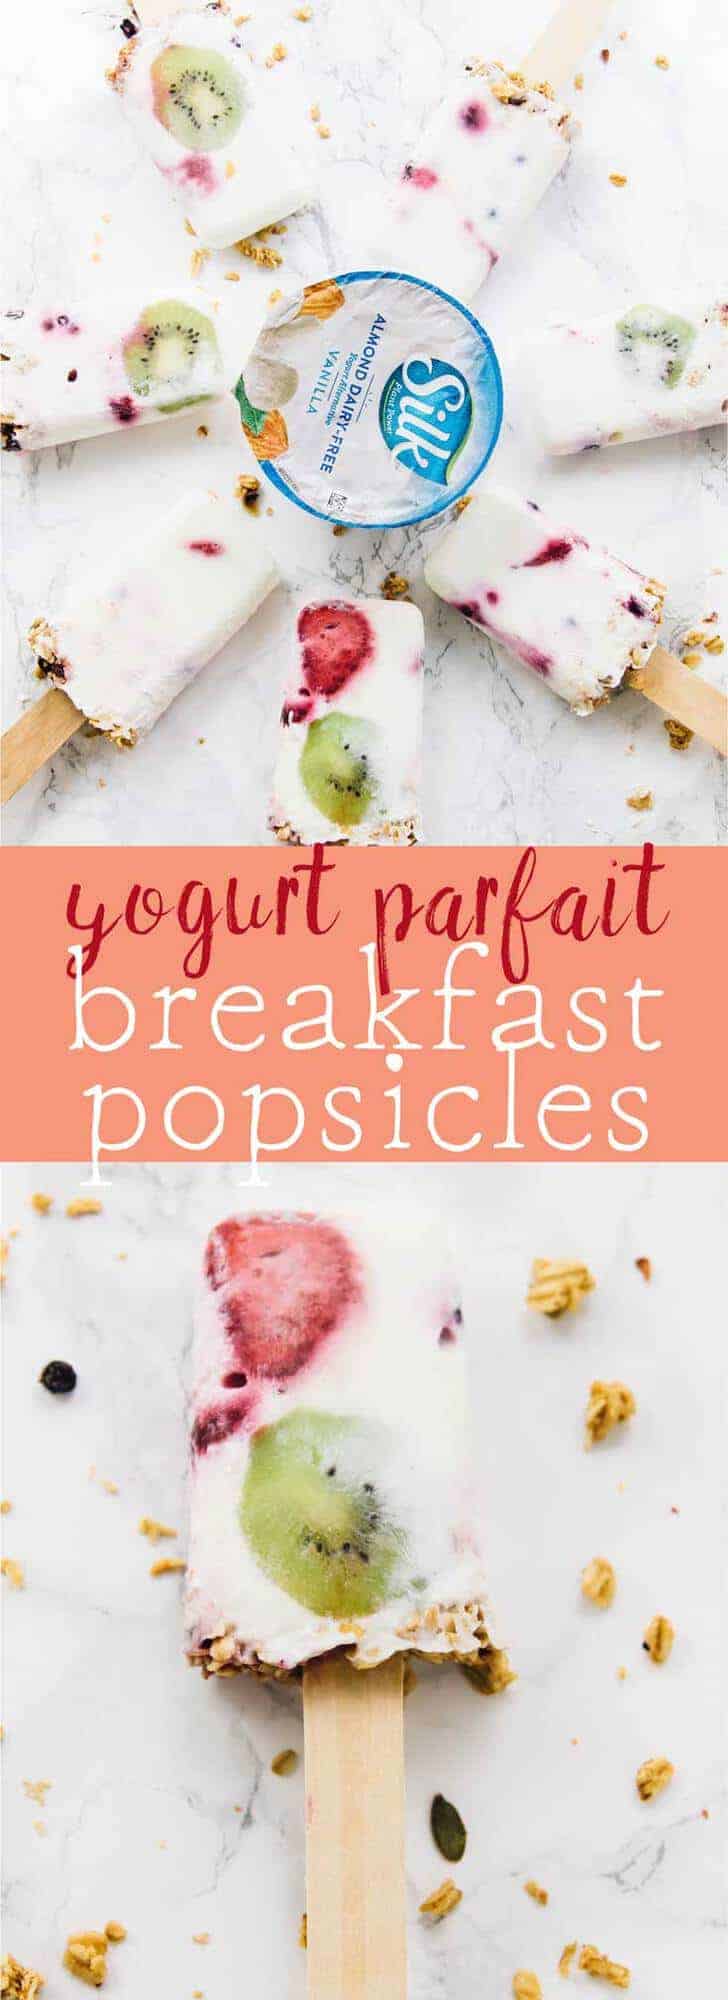 Want something to cool you down? These Vegan Yogurt Parfait Breakfast Popsicles are perfect for a breakfast on the go, or a quick and easy summer treat to cool you down! Great for kids! via https://jessicainthekitchen.com 